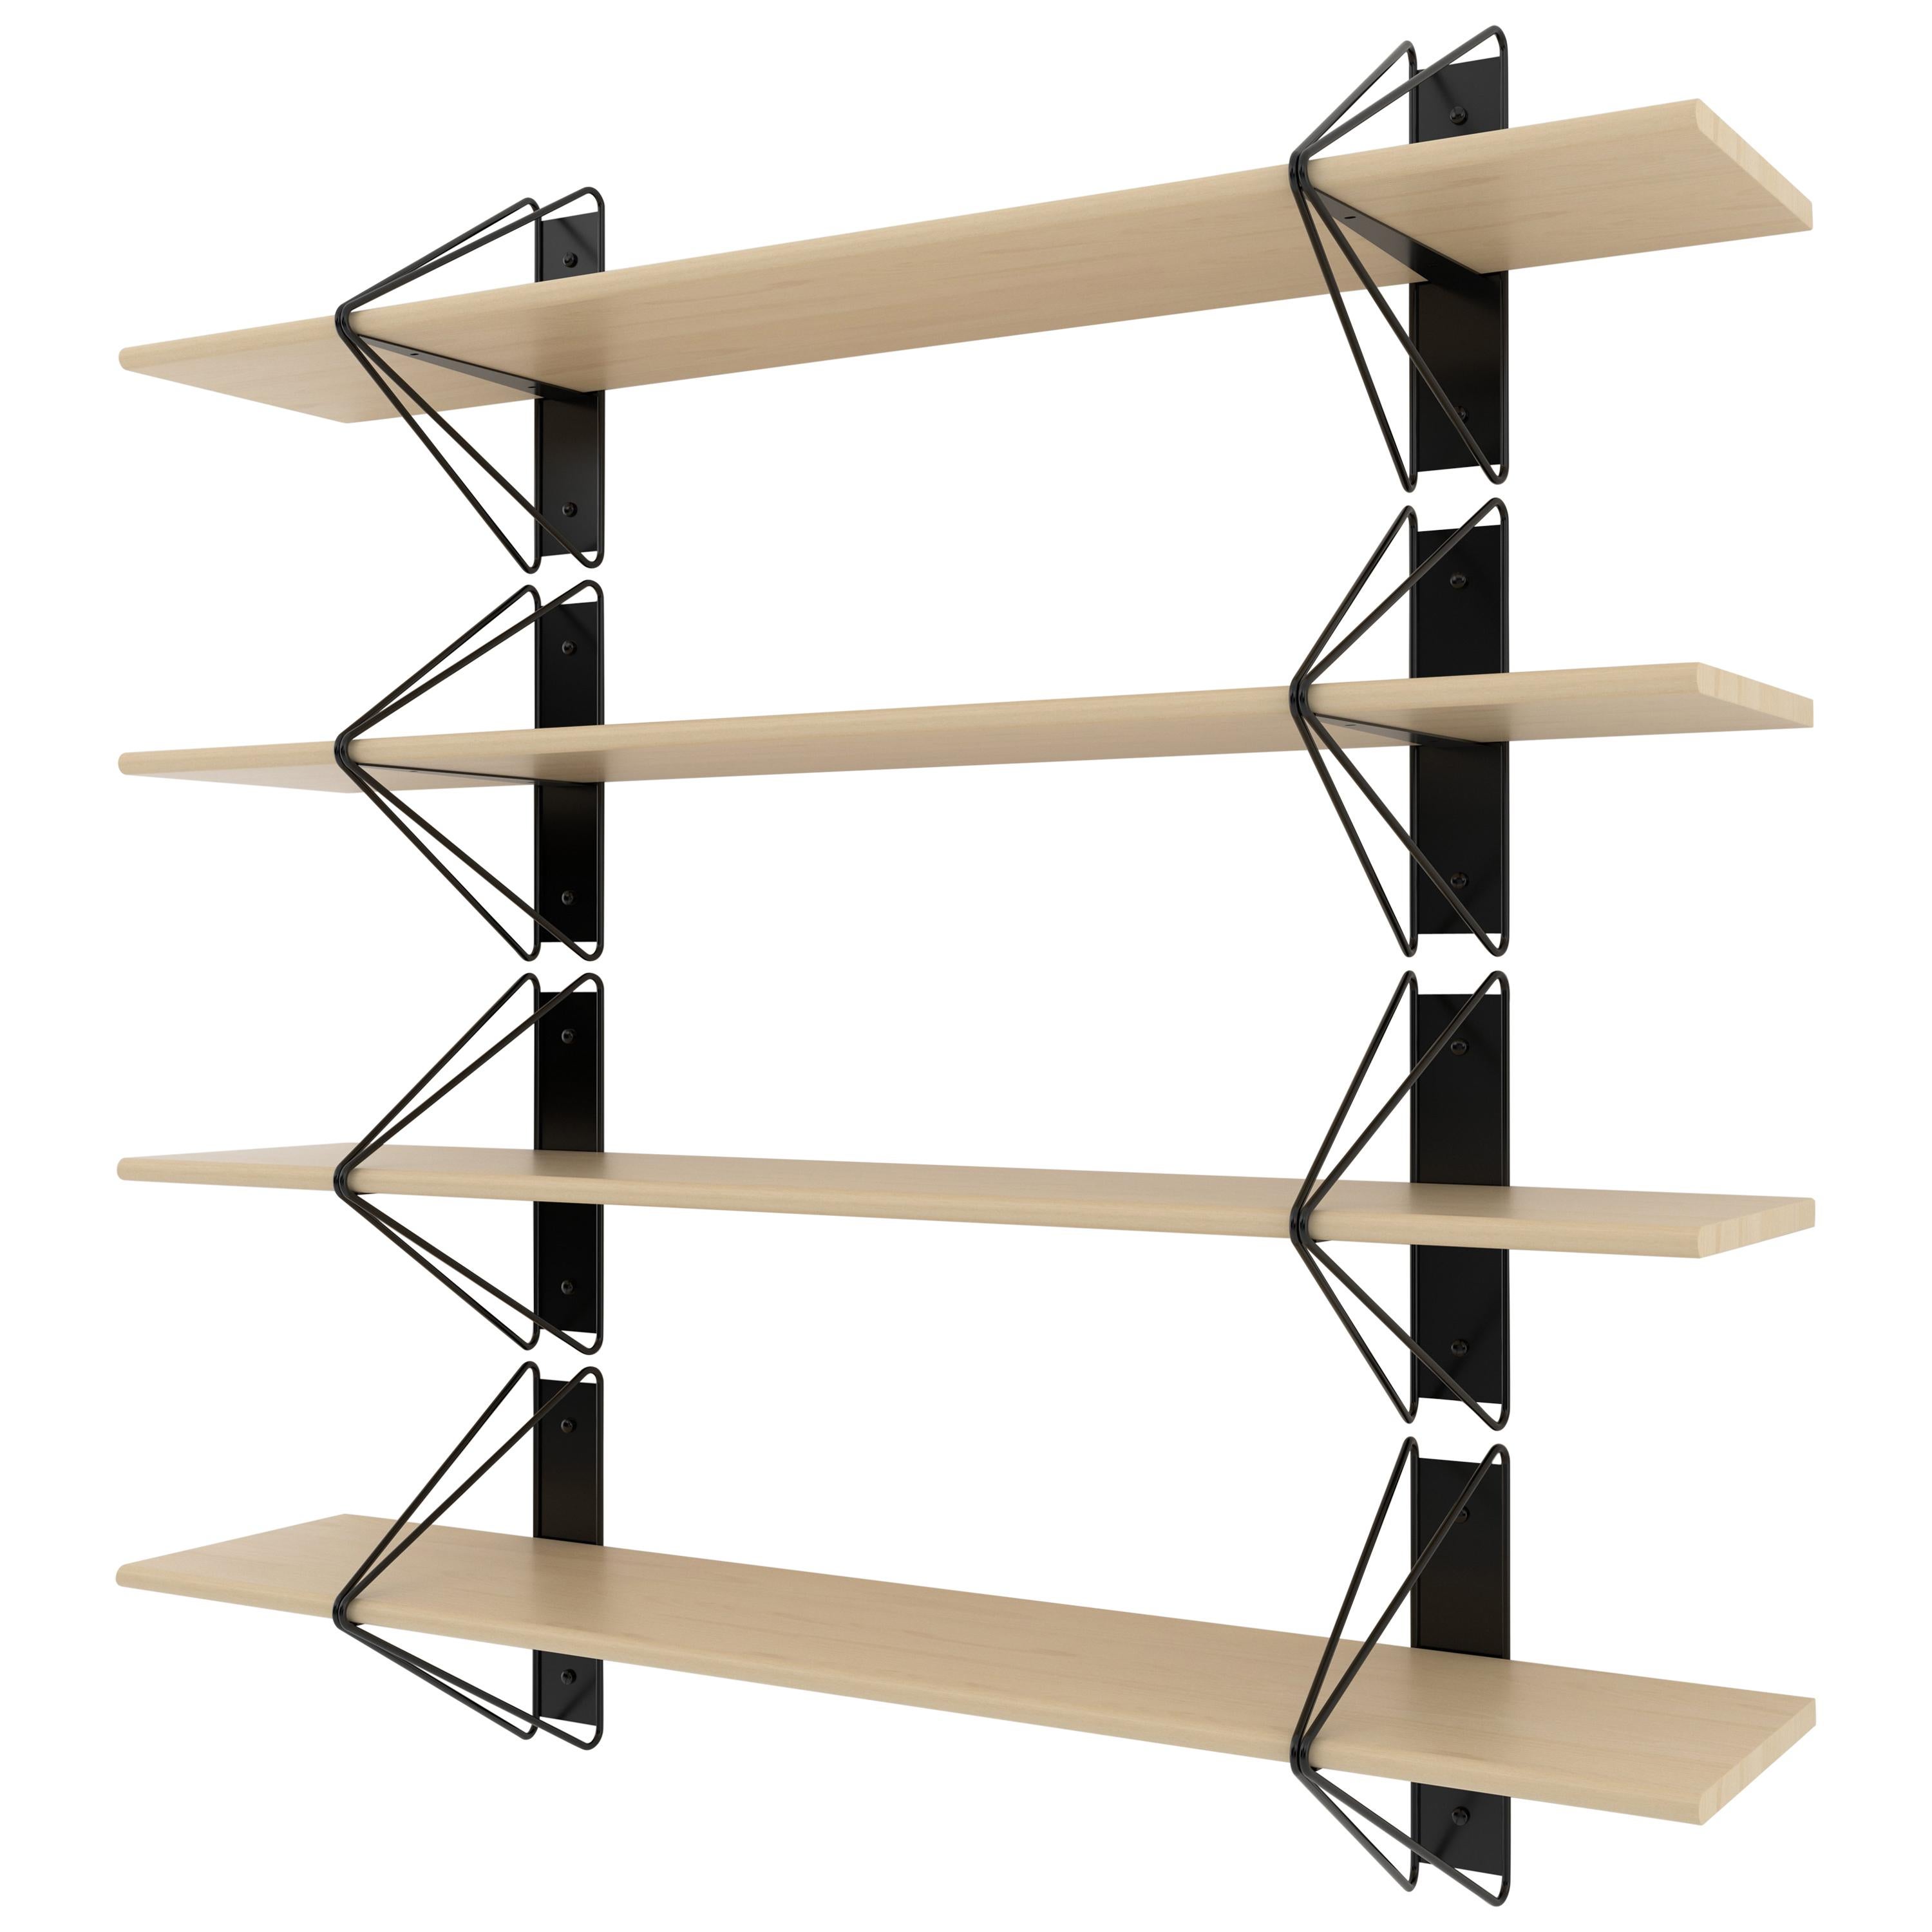 American Set of 5 Strut Shelves from Souda, 52in, Black and Walnut, Made to Order For Sale